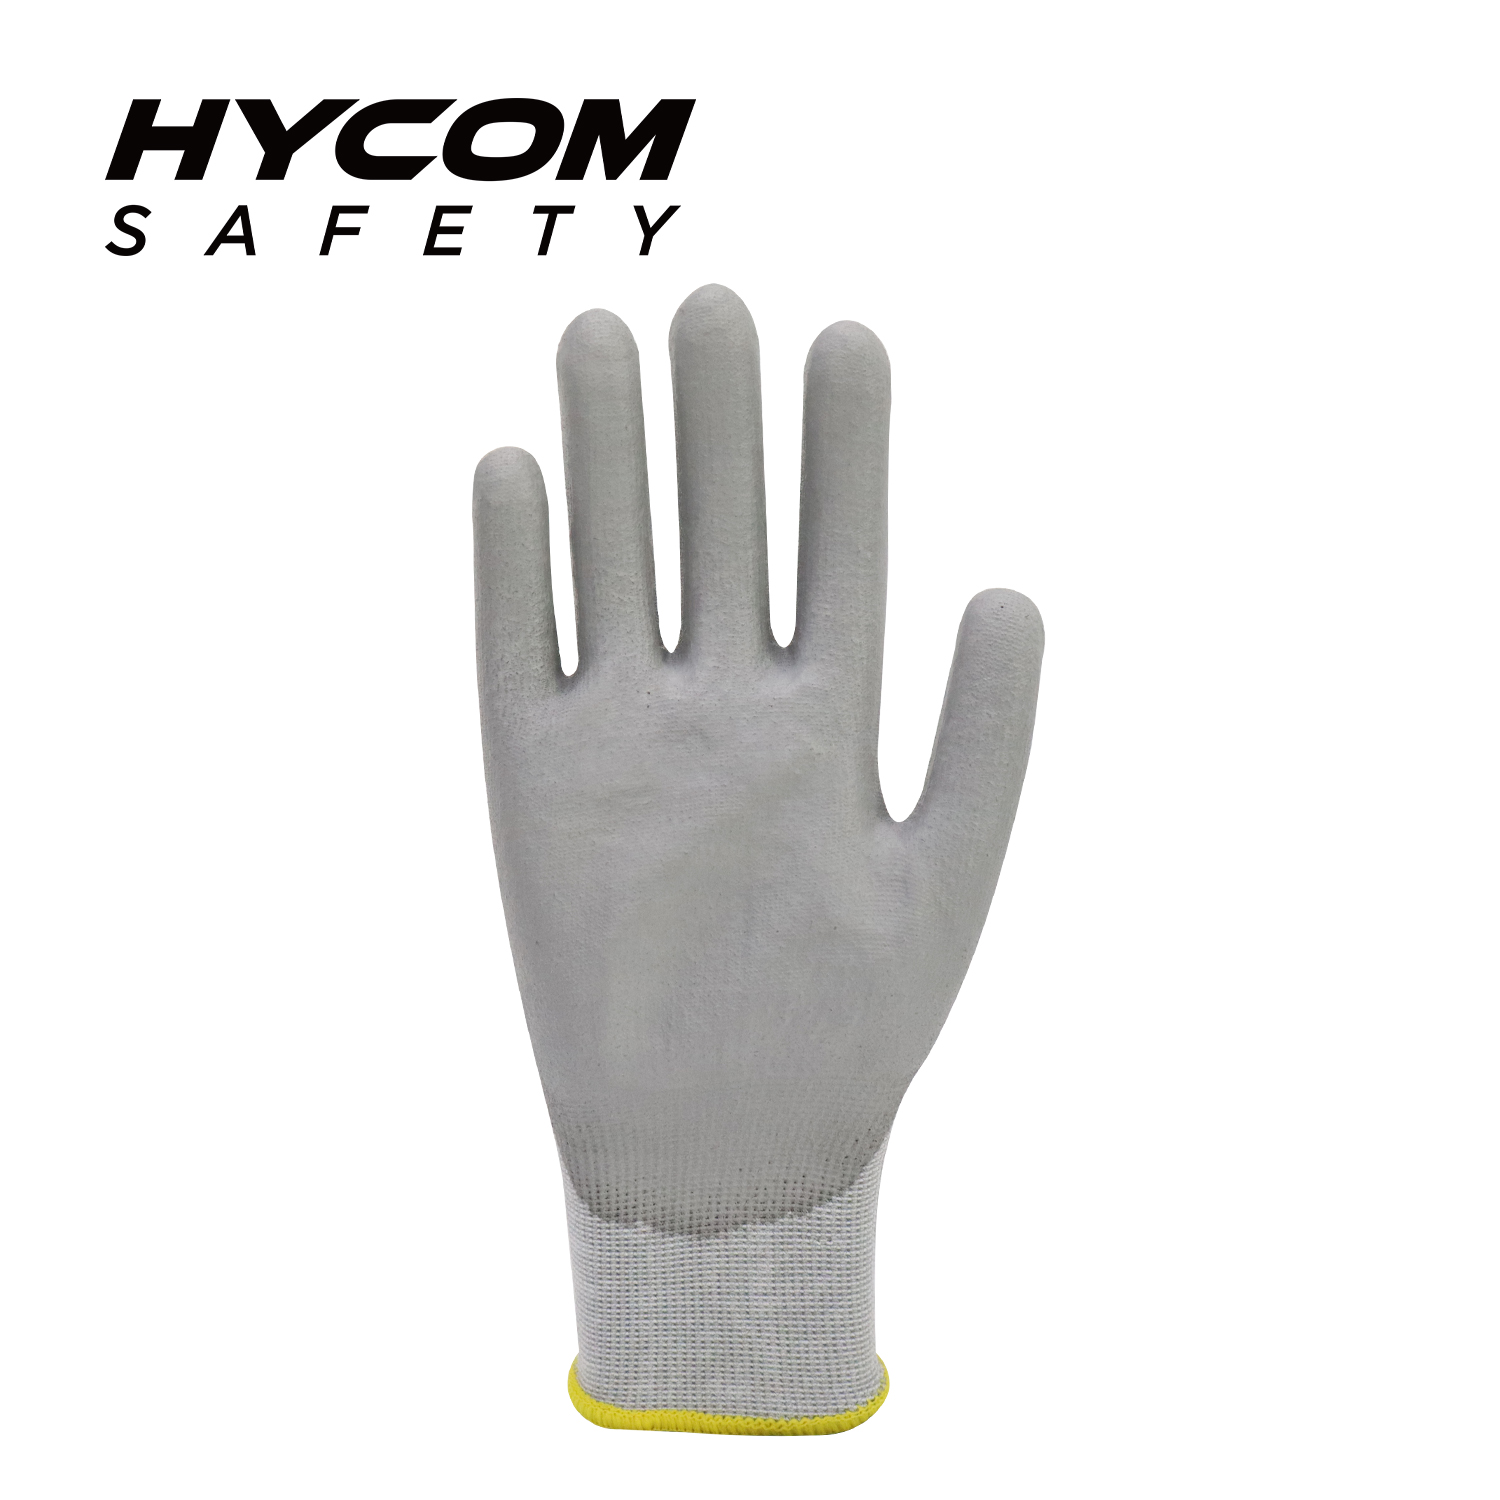 HYCOM 18G ANSI 2 Breathable Yarn Cut Resistant Glove Coated with Palm Polyurethane Super Thiner Work Gloves